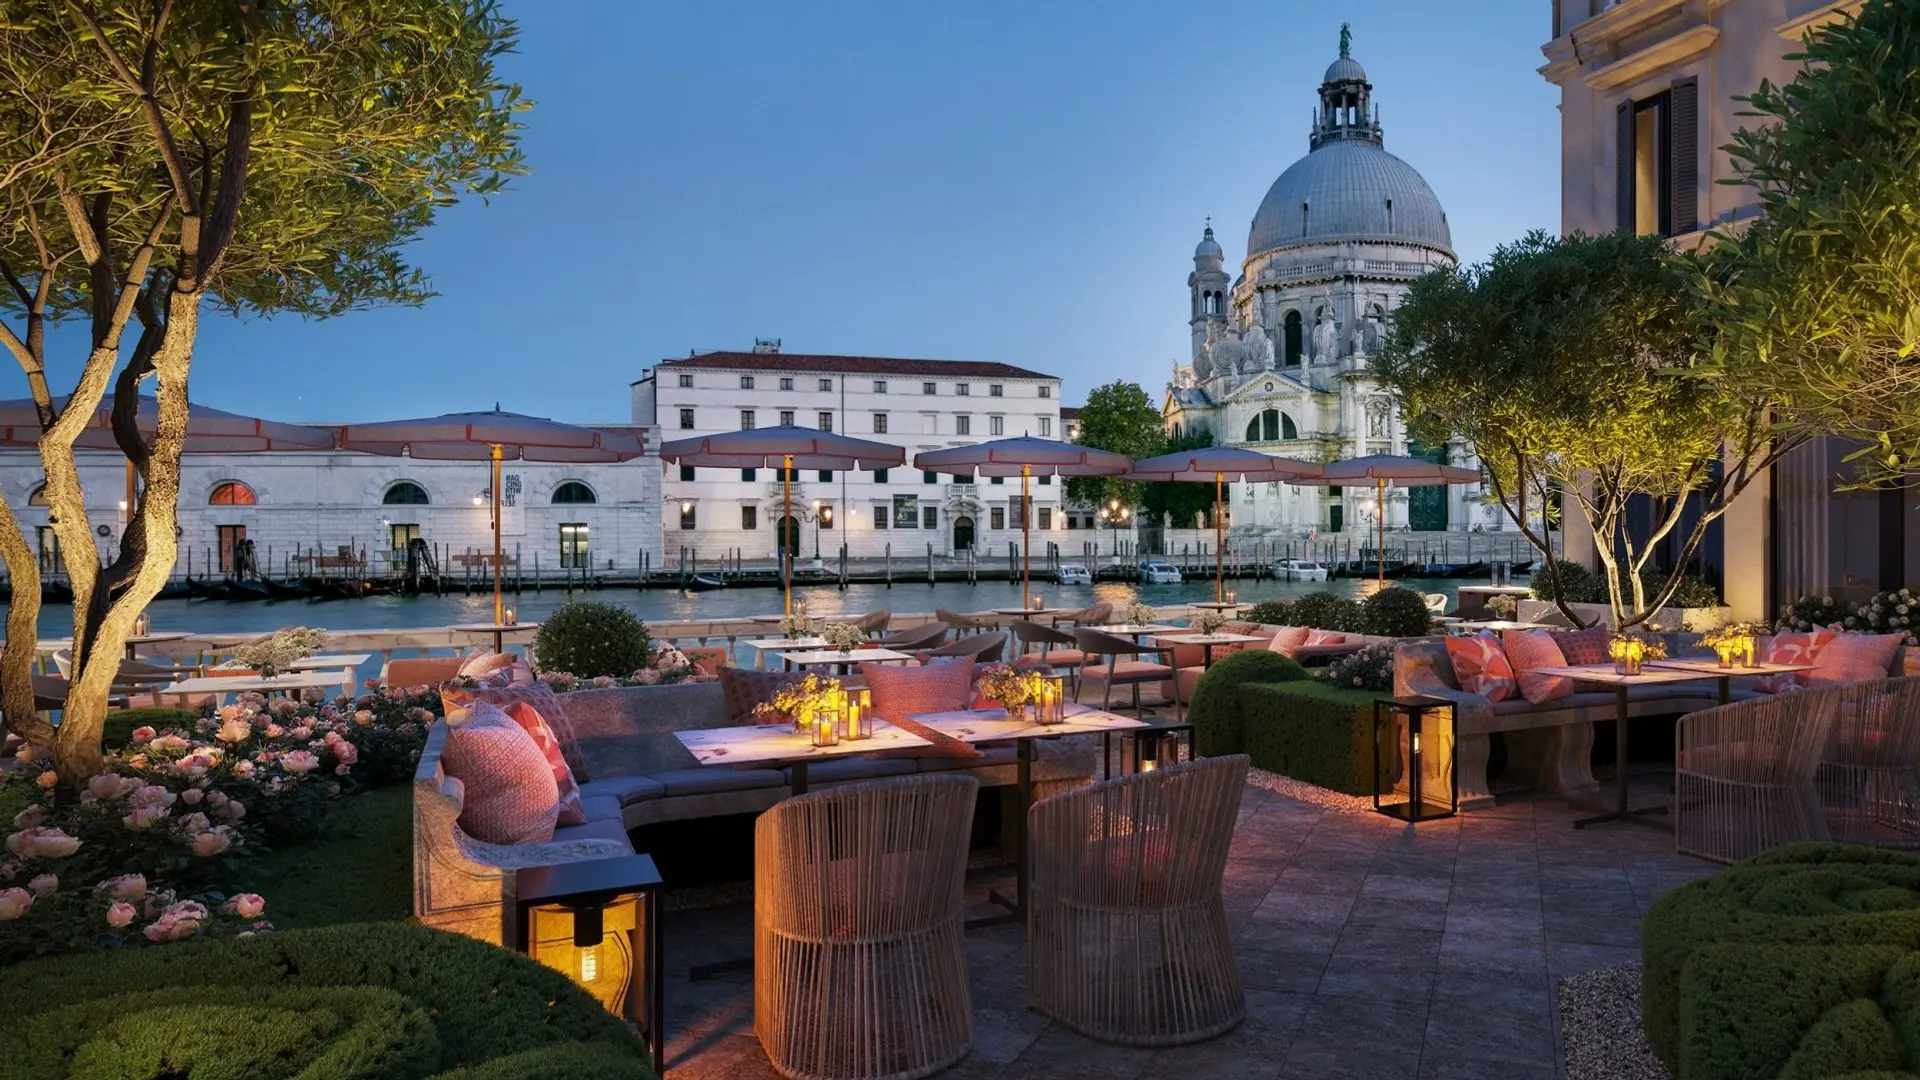 St. Regis Venice hotel in the private garden and pool area at evening time